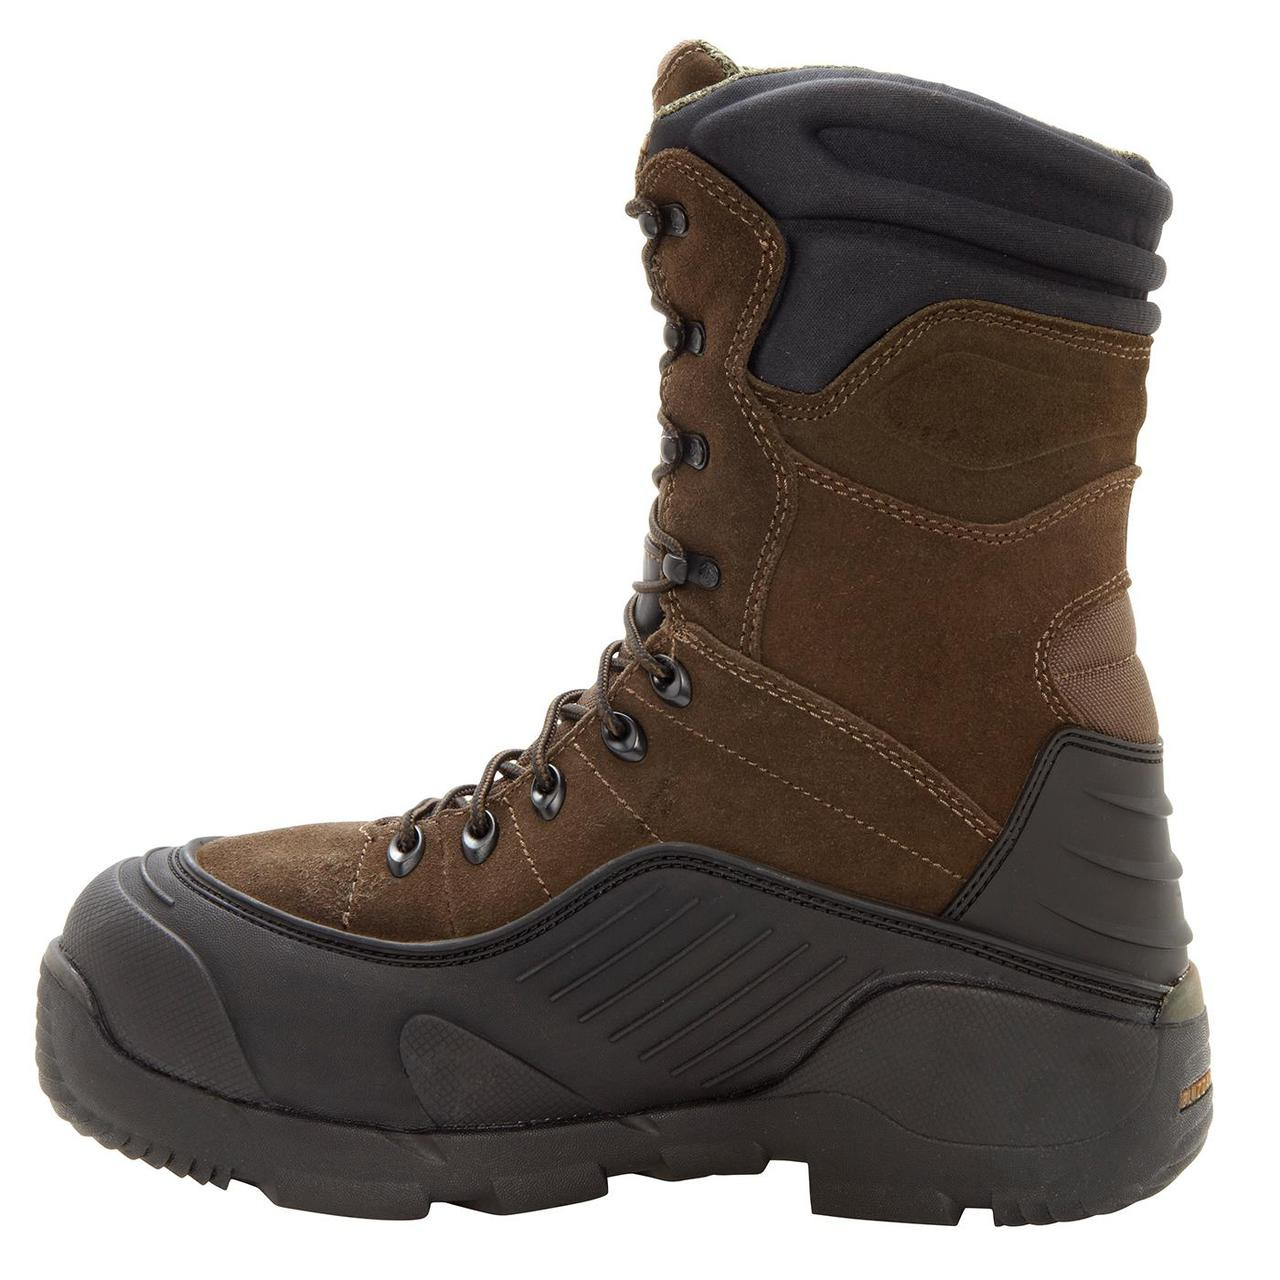 thinsulate ultra insulation boots